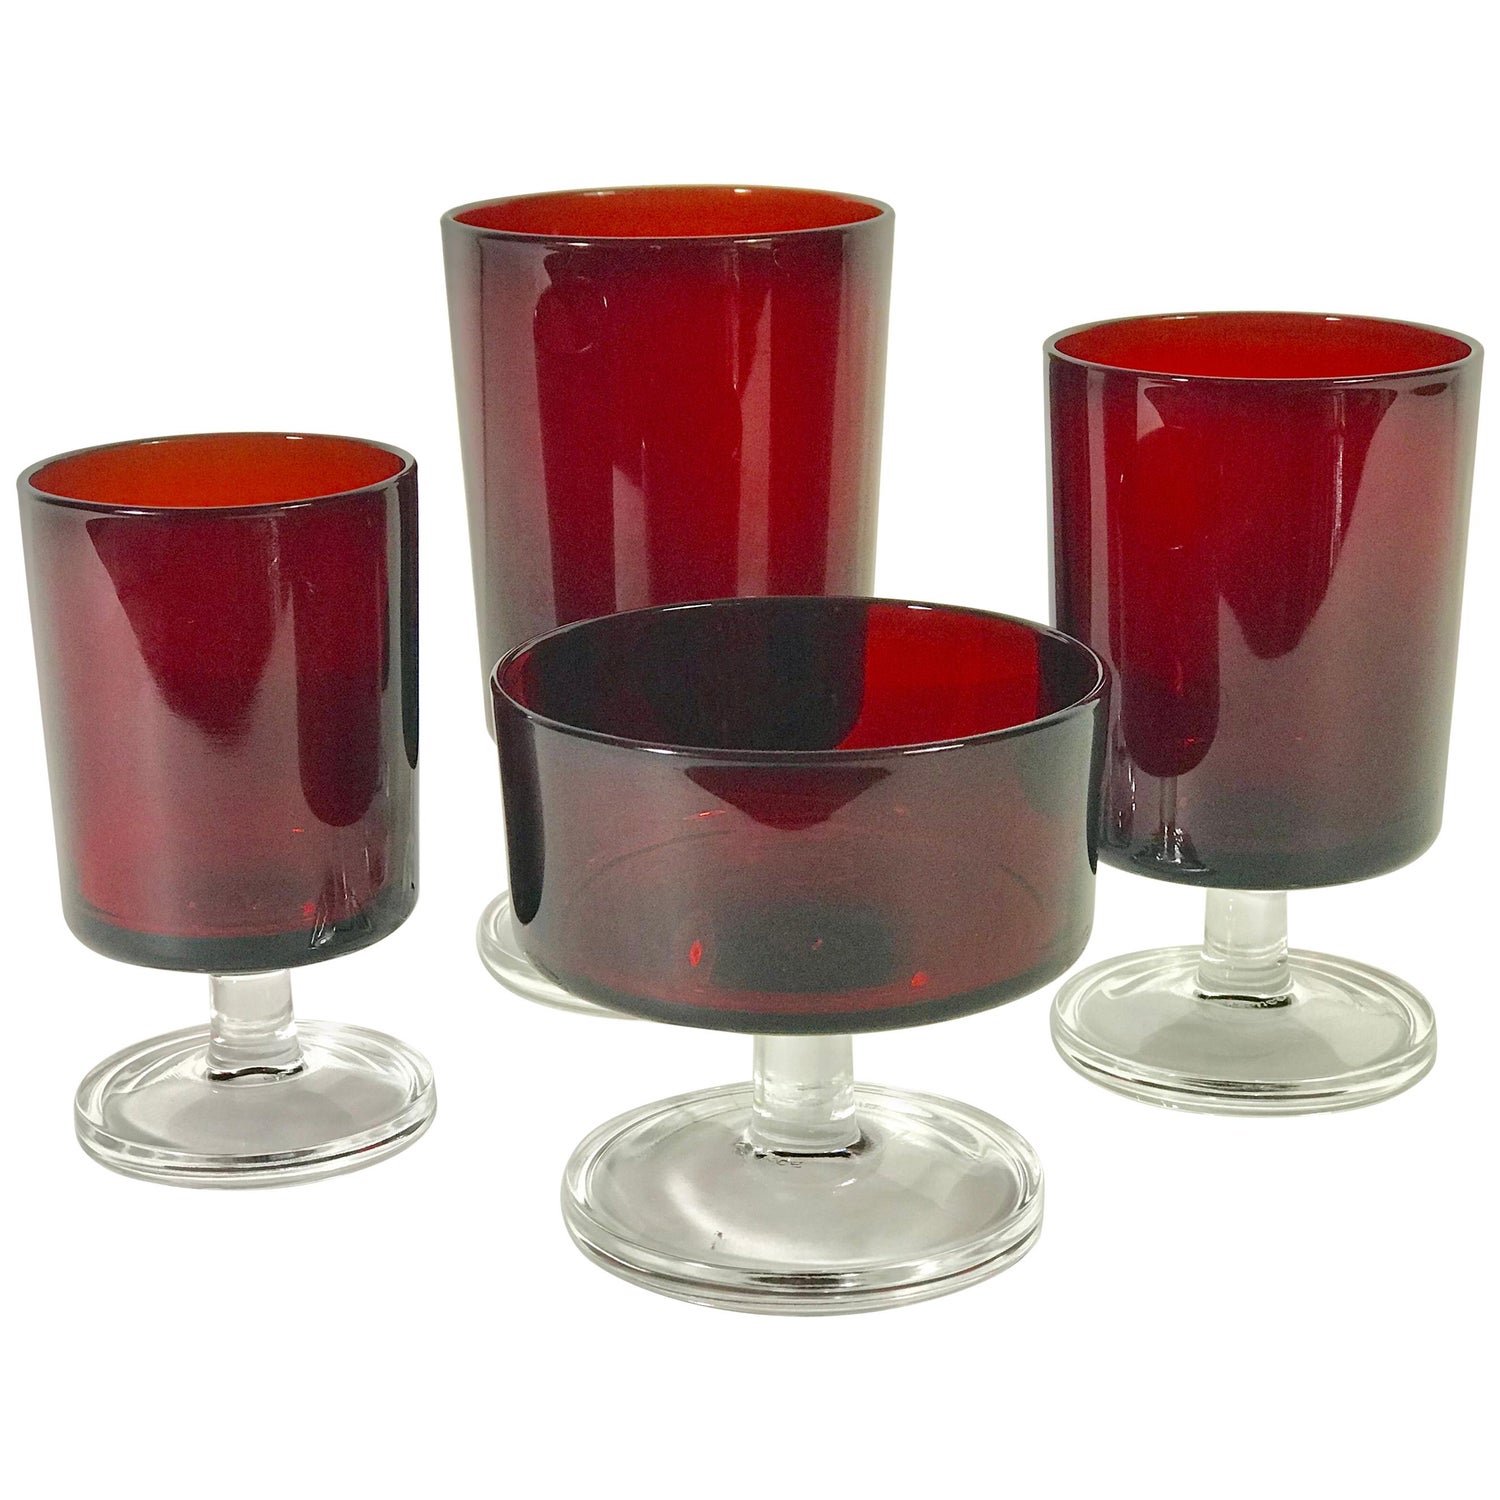 https://a.1stdibscdn.com/32-french-luminarc-ruby-red-glasses-stemware-service-for-8-made-in-france-for-sale/1121189/f_160797321568362025498/16079732_master.jpeg?width=1500